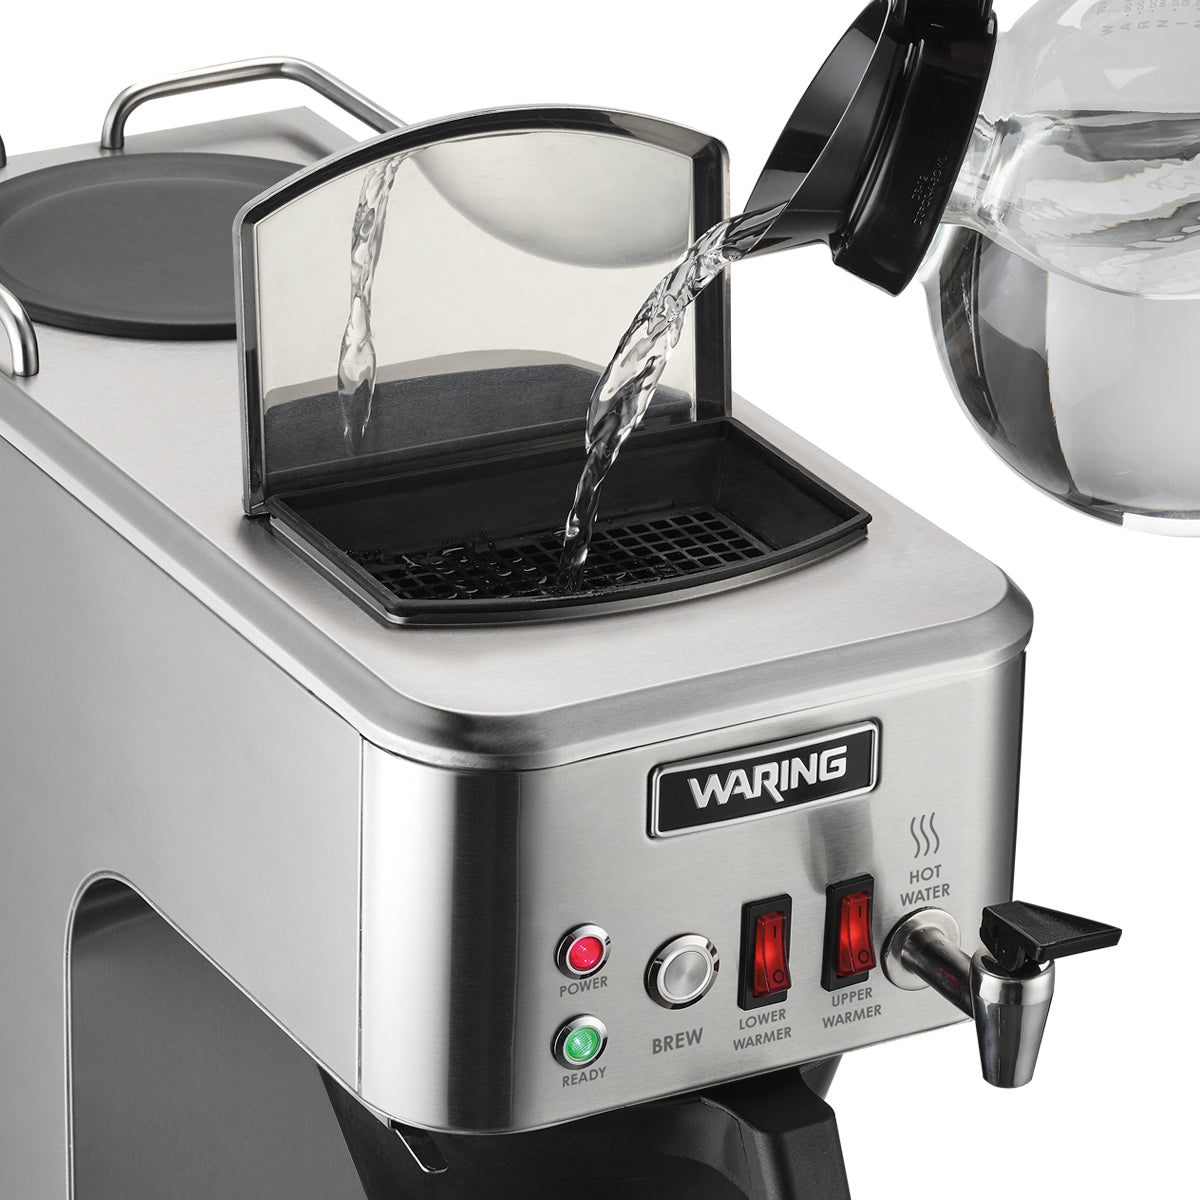 WCM50P "Café Deco" Automatic Coffee Brewer with Two Warmers & Hot Water Faucet by Waring Commercial